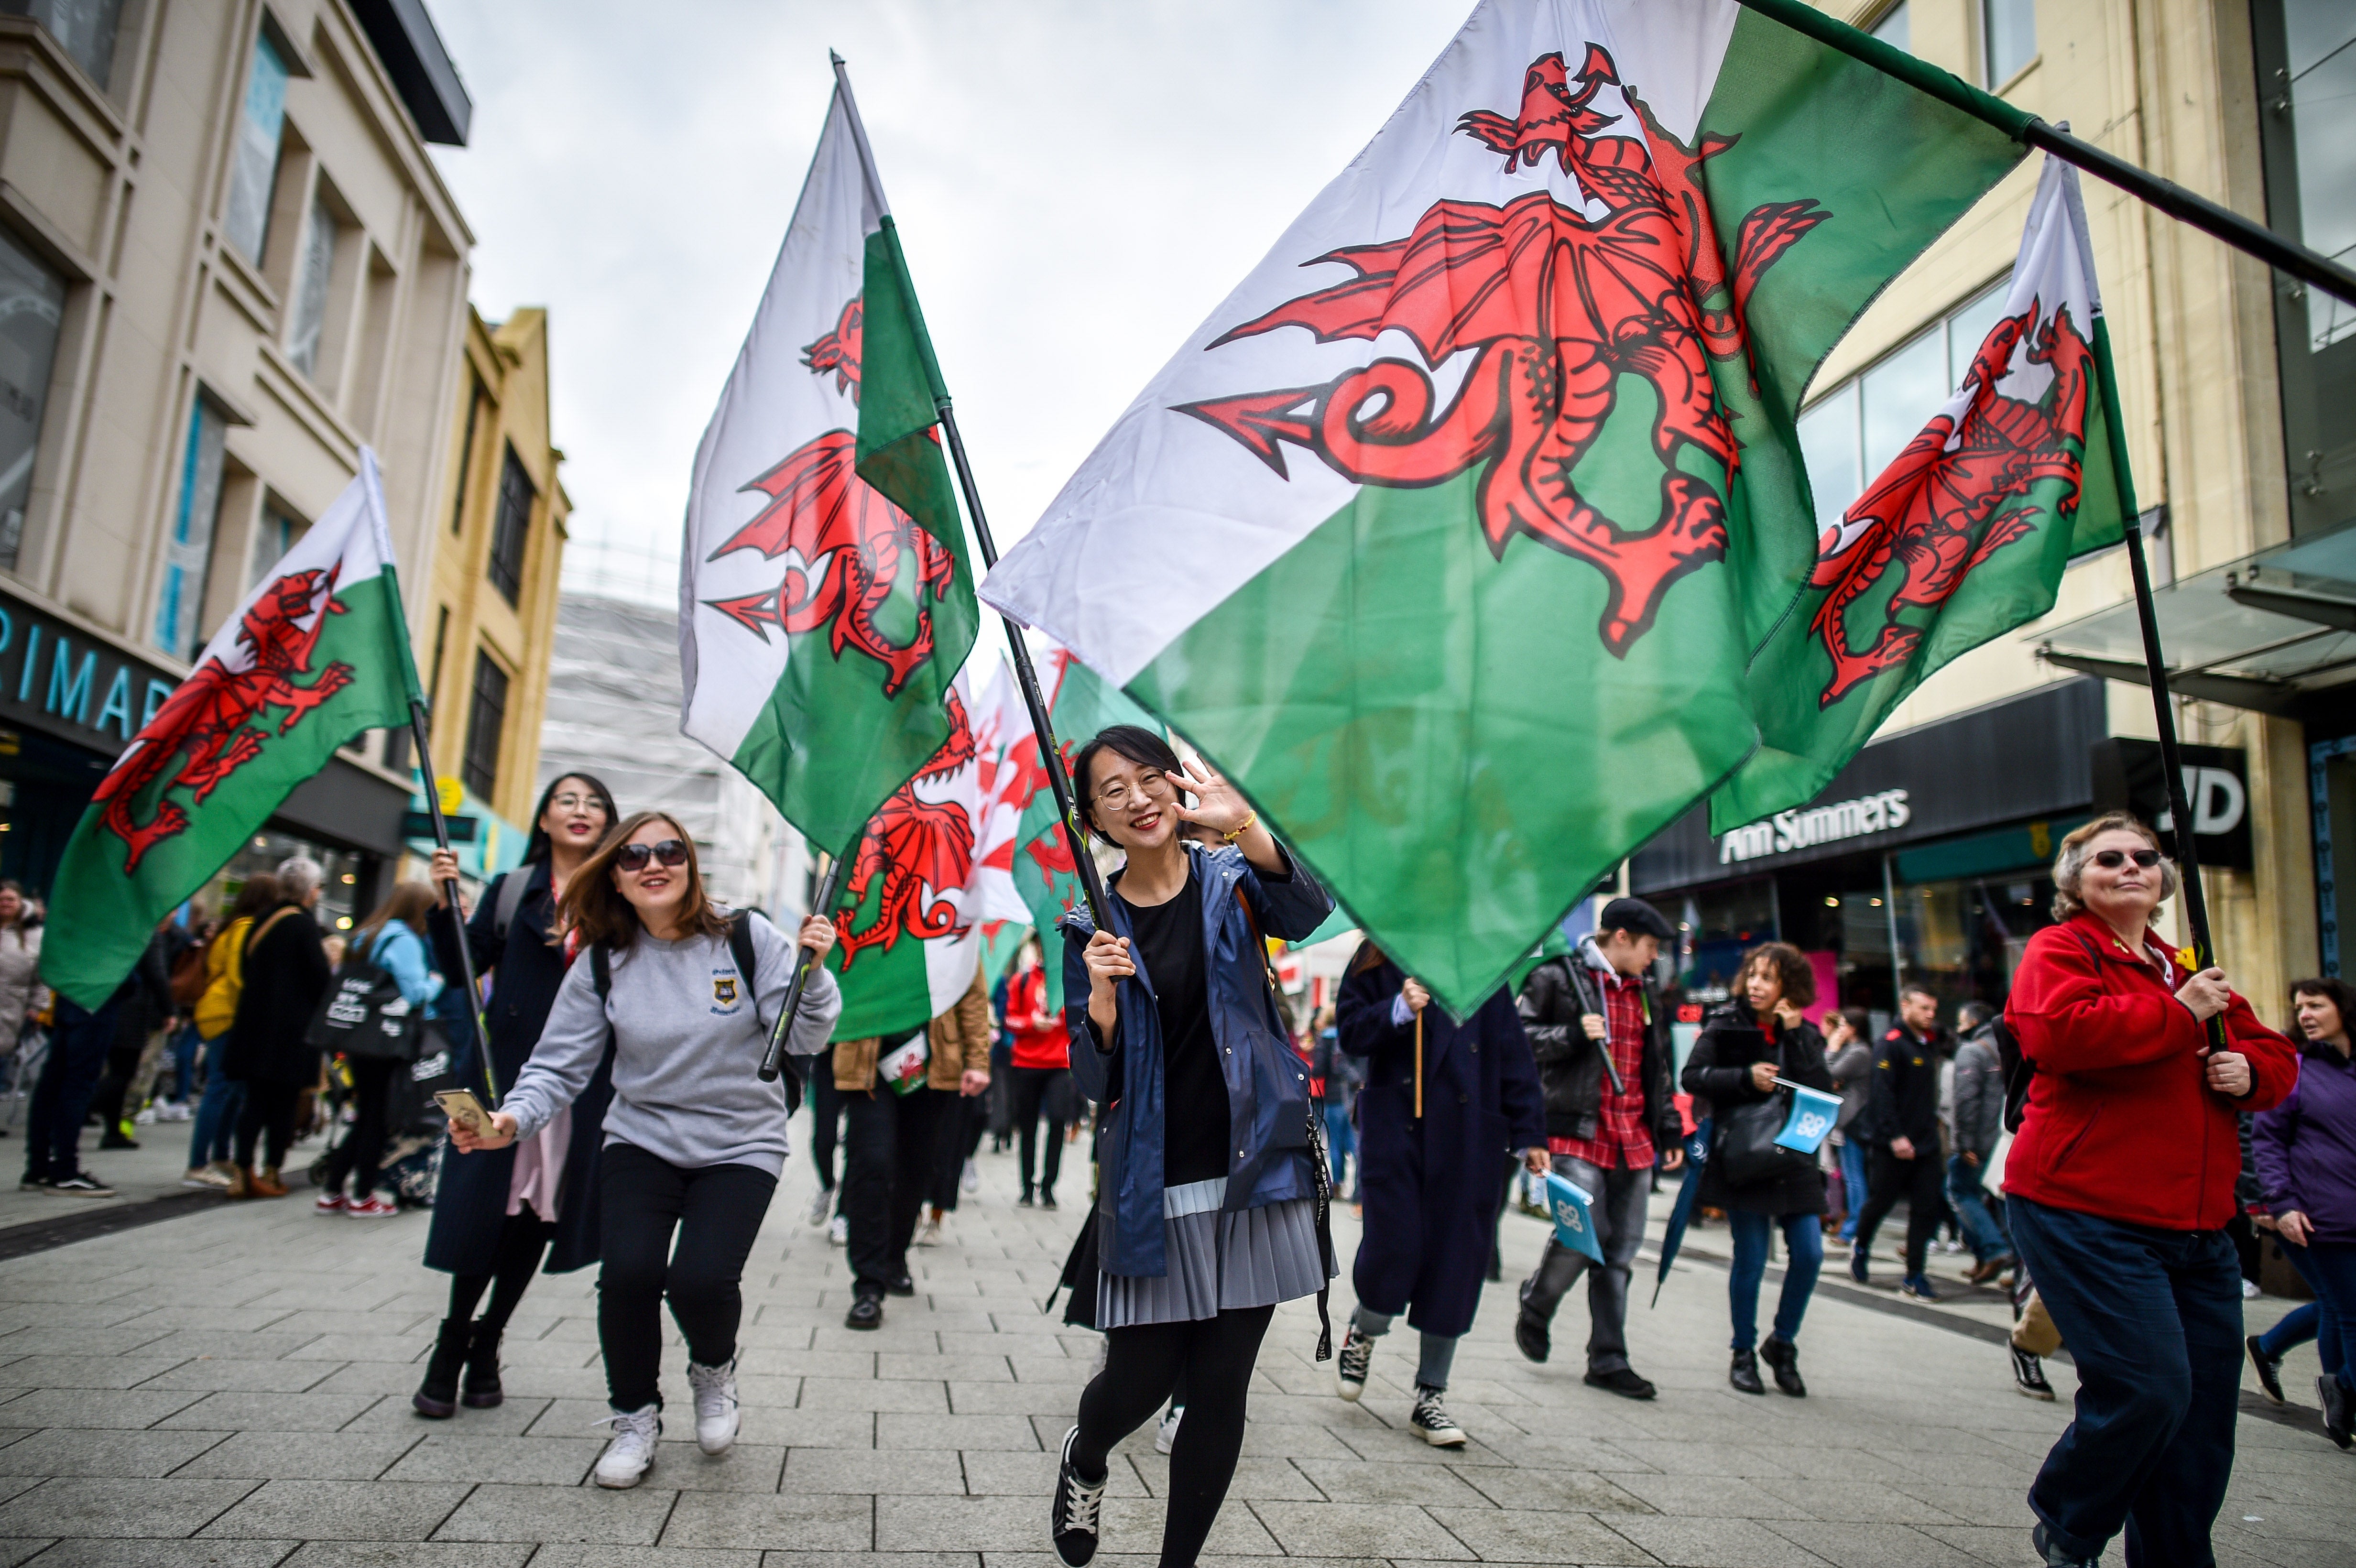 People take part in a St David’s Day parade in Cardiff (Ben Birchall/PA)